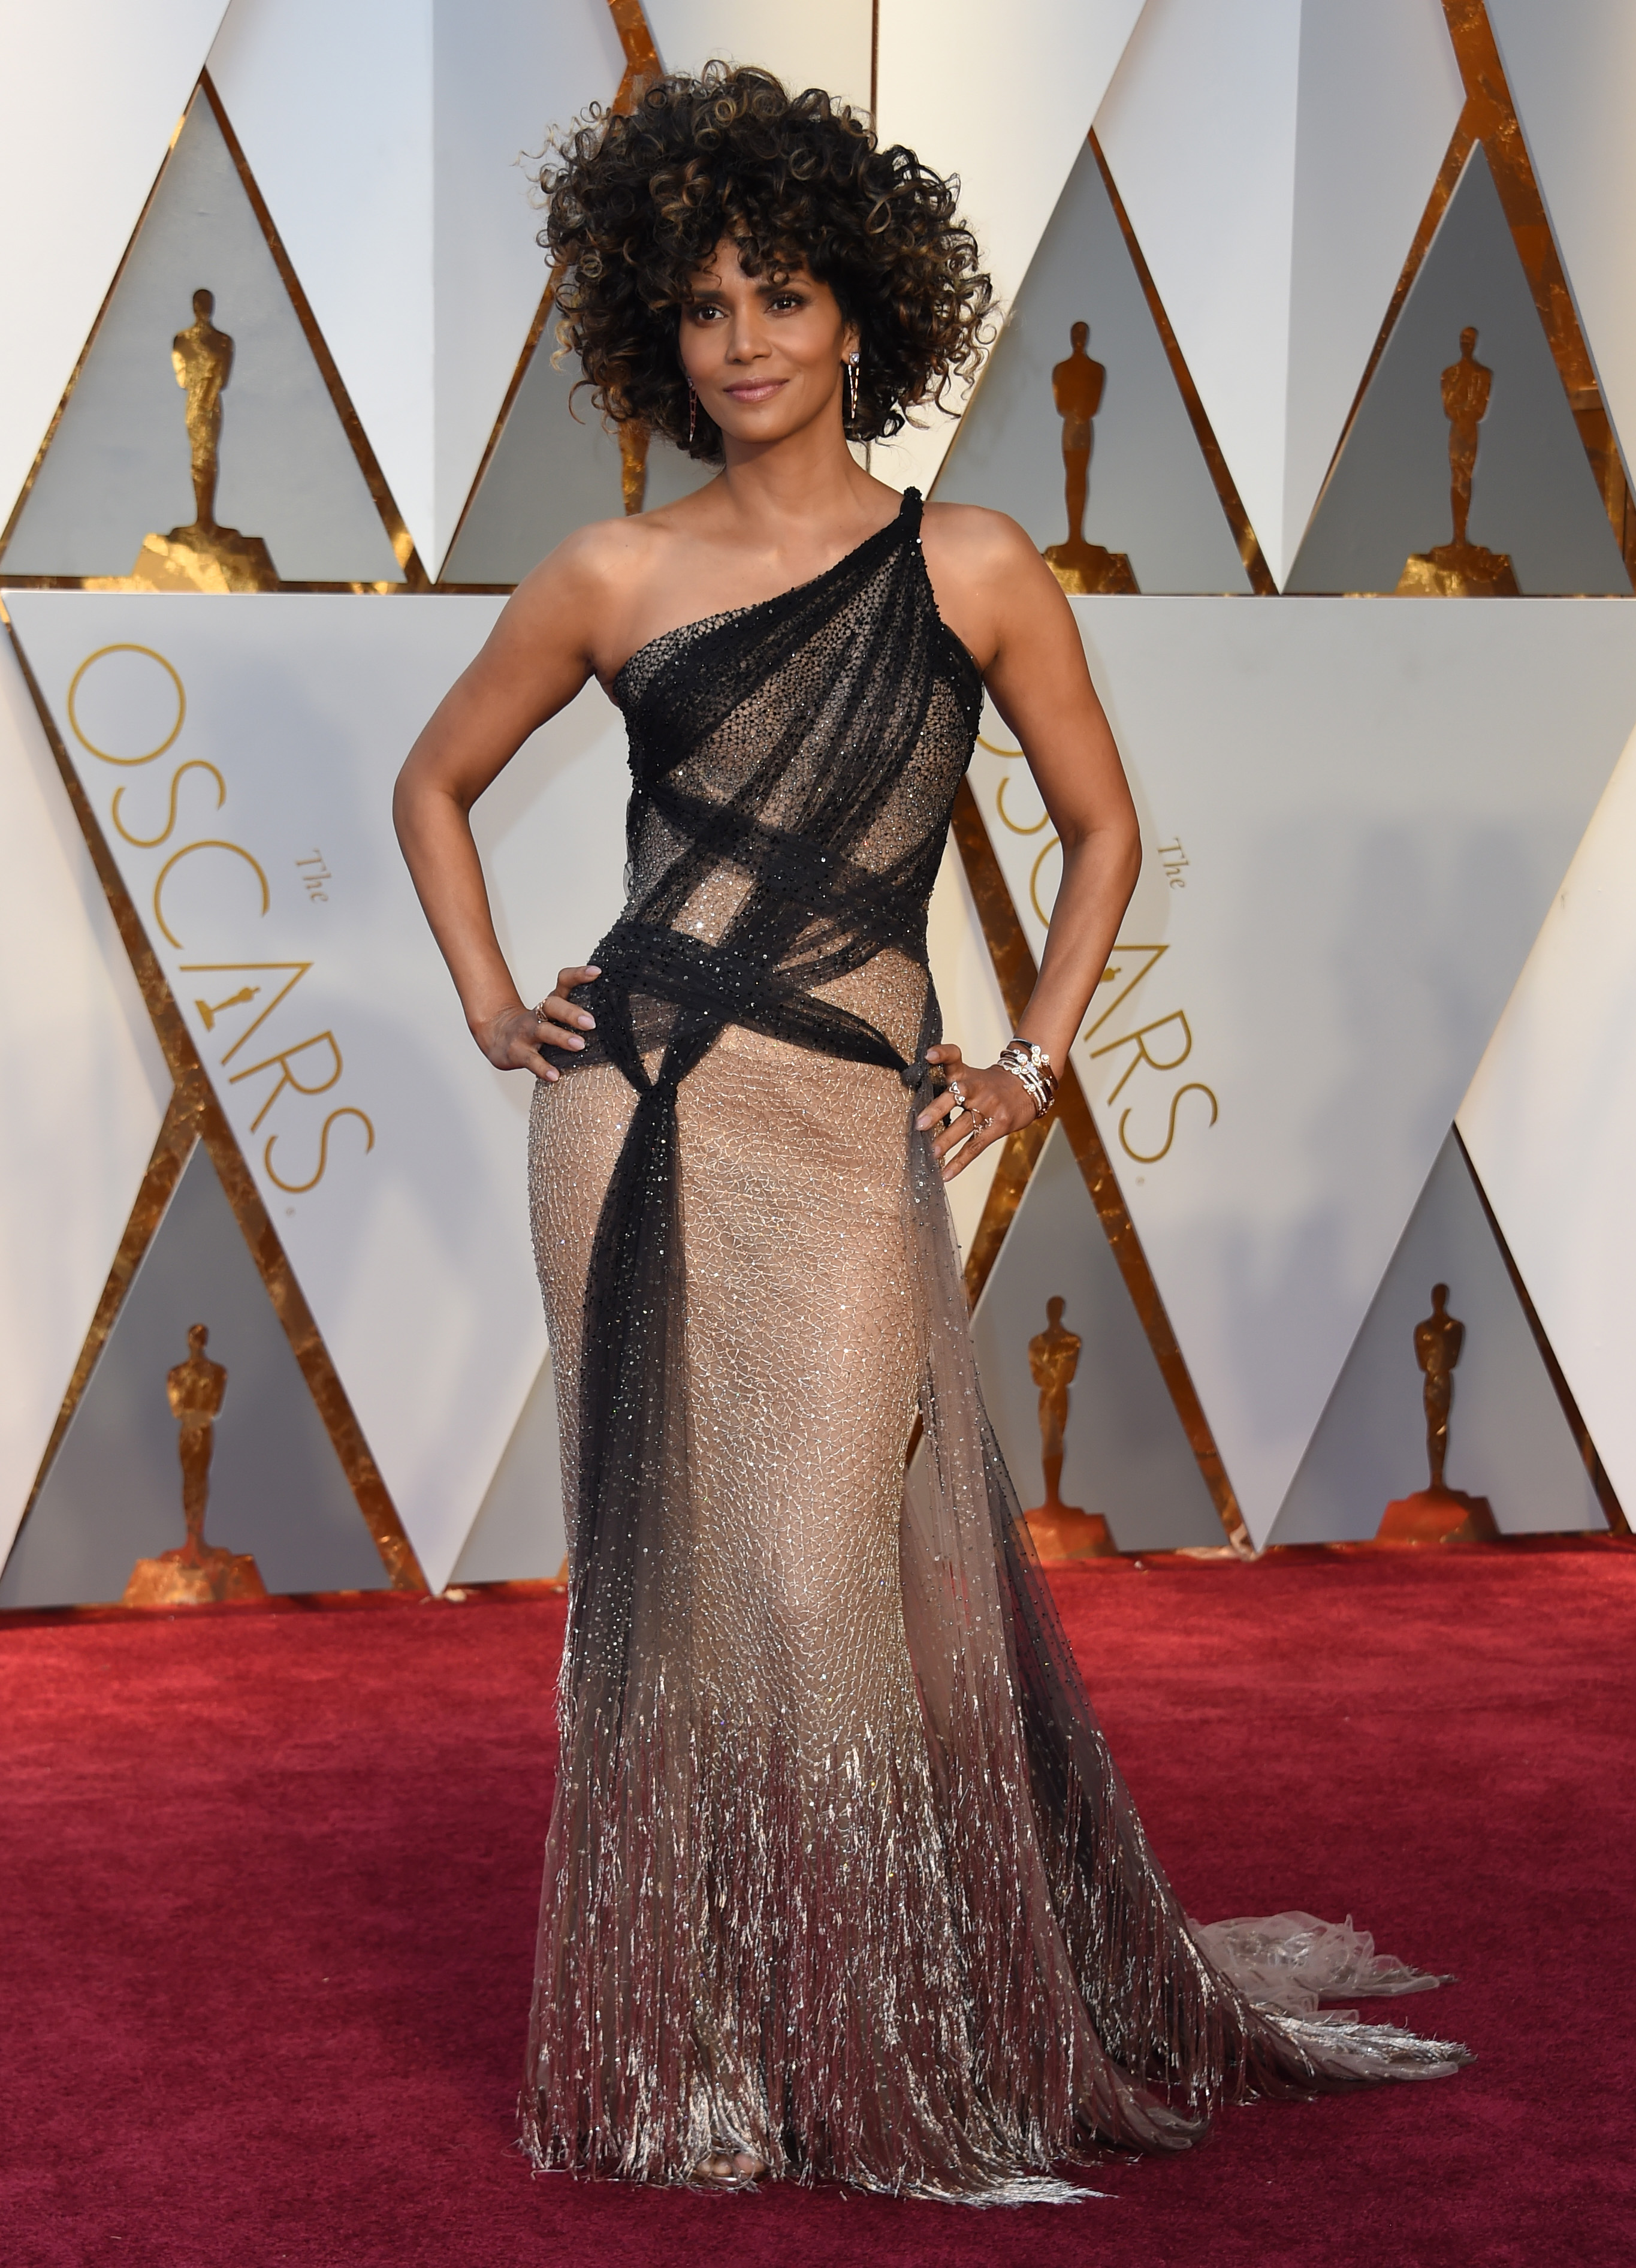 Halle Berry arrives on the red carpet for the 89th Oscars on February 26, 2017 in Hollywood, California.  / AFP PHOTO / VALERIE MACON